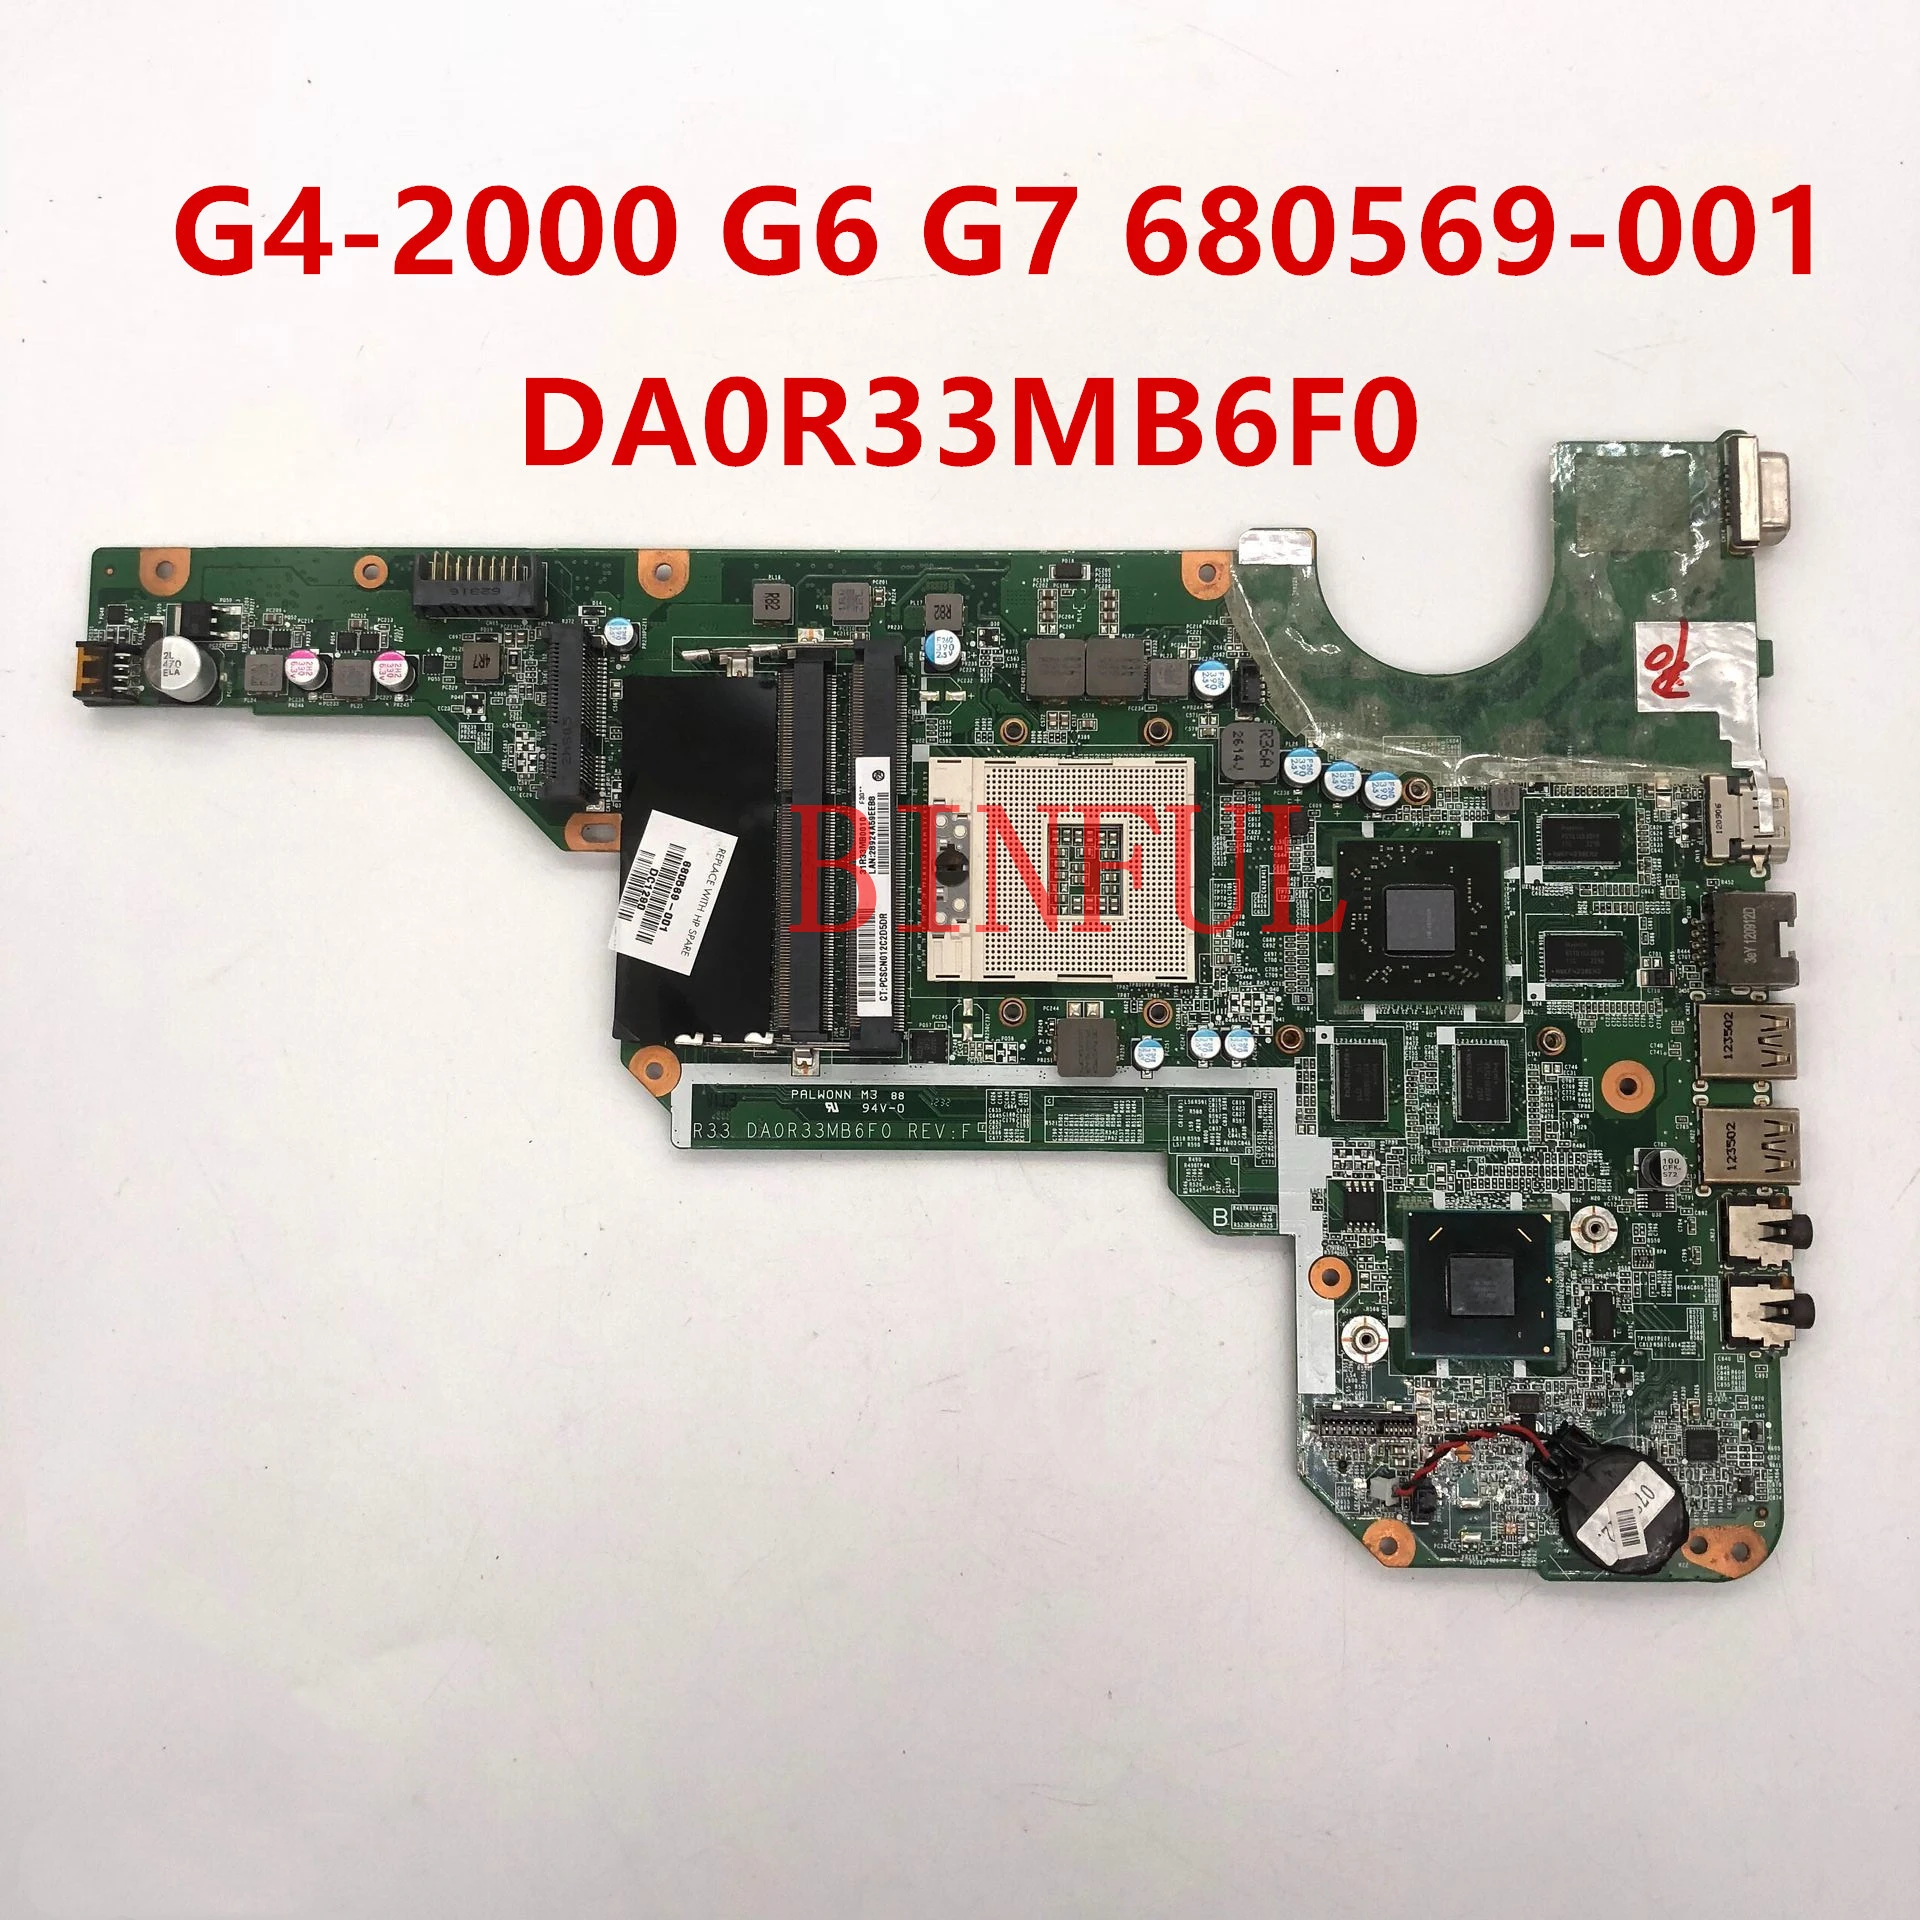 the best pc motherboard 680570-001 680570-501 680570-601 680569-001 For HP G4-2000 G6-2000 G7-2000 Laptop Motherboard DA0R33MB6F1 DA0R33MB6F0 HM76 Test best pc mother board